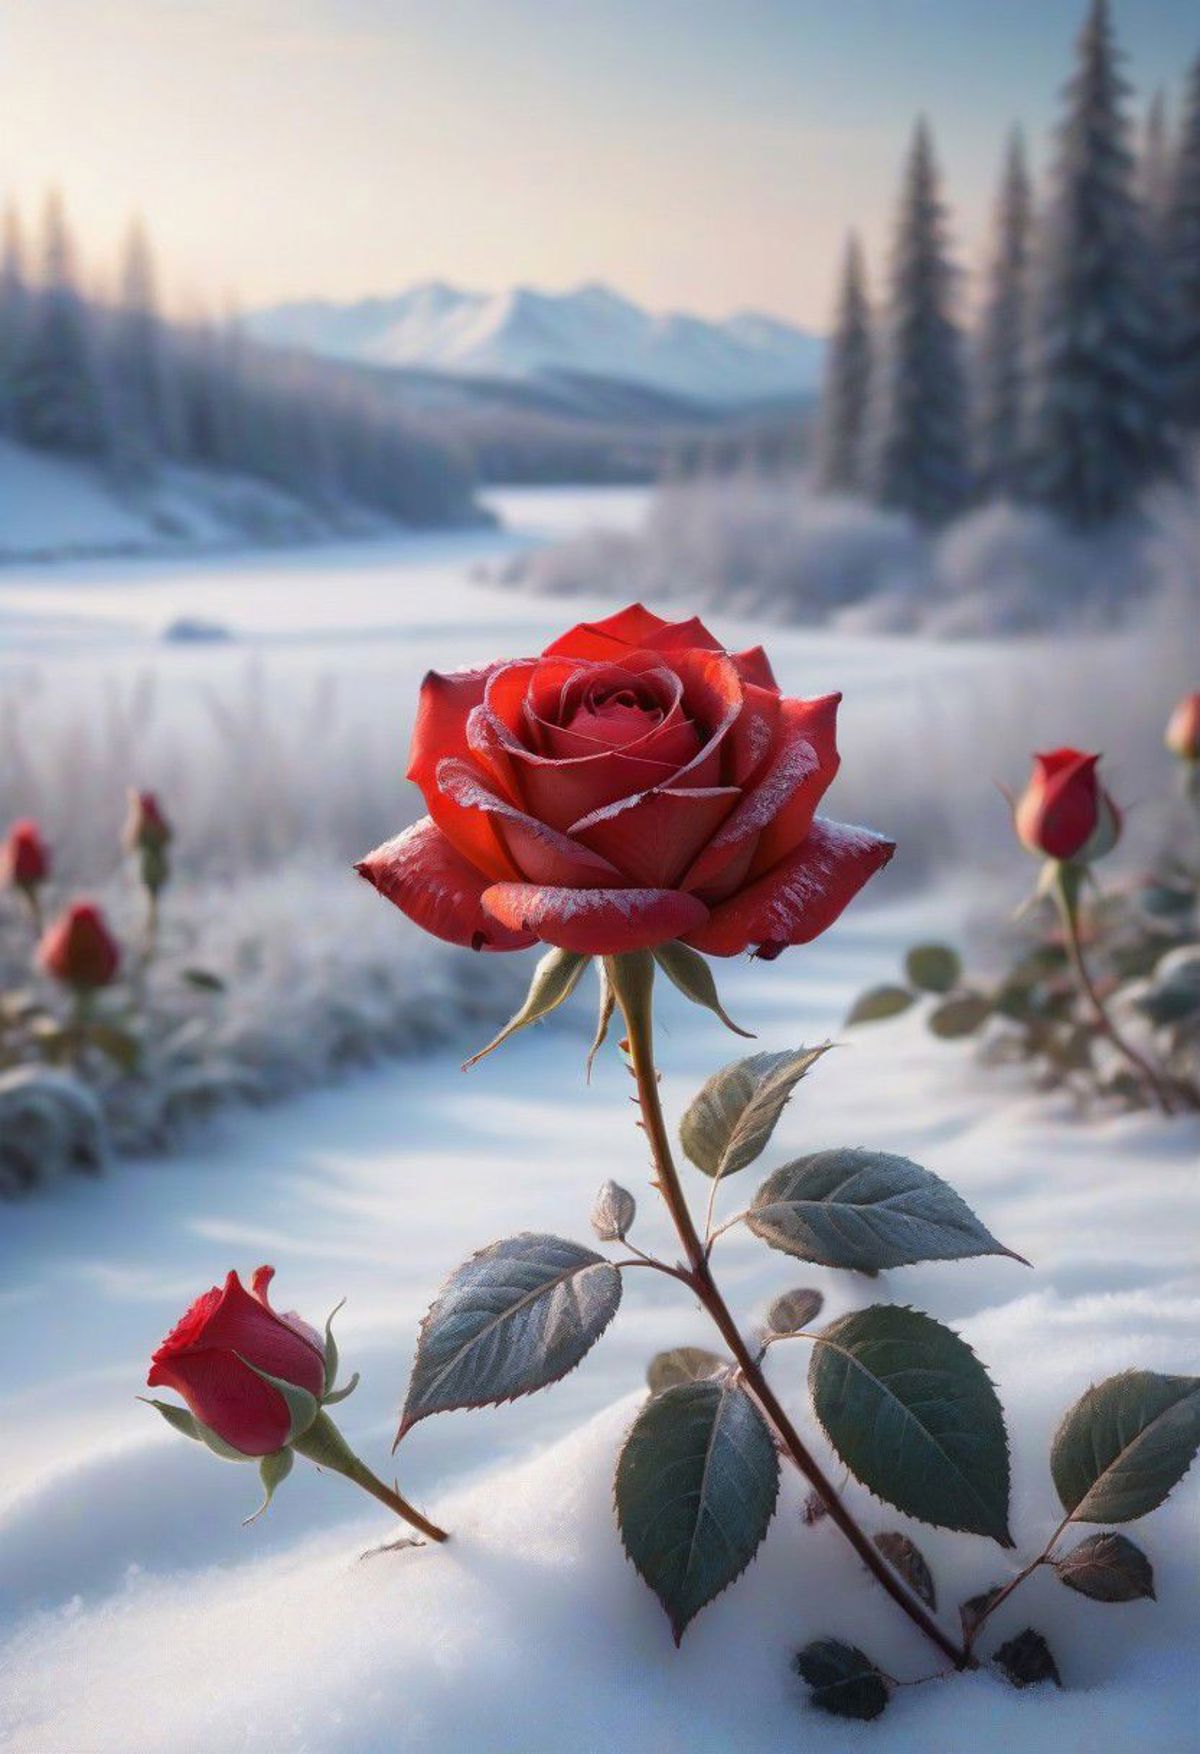 A Single Rose in Snow-Covered Ground